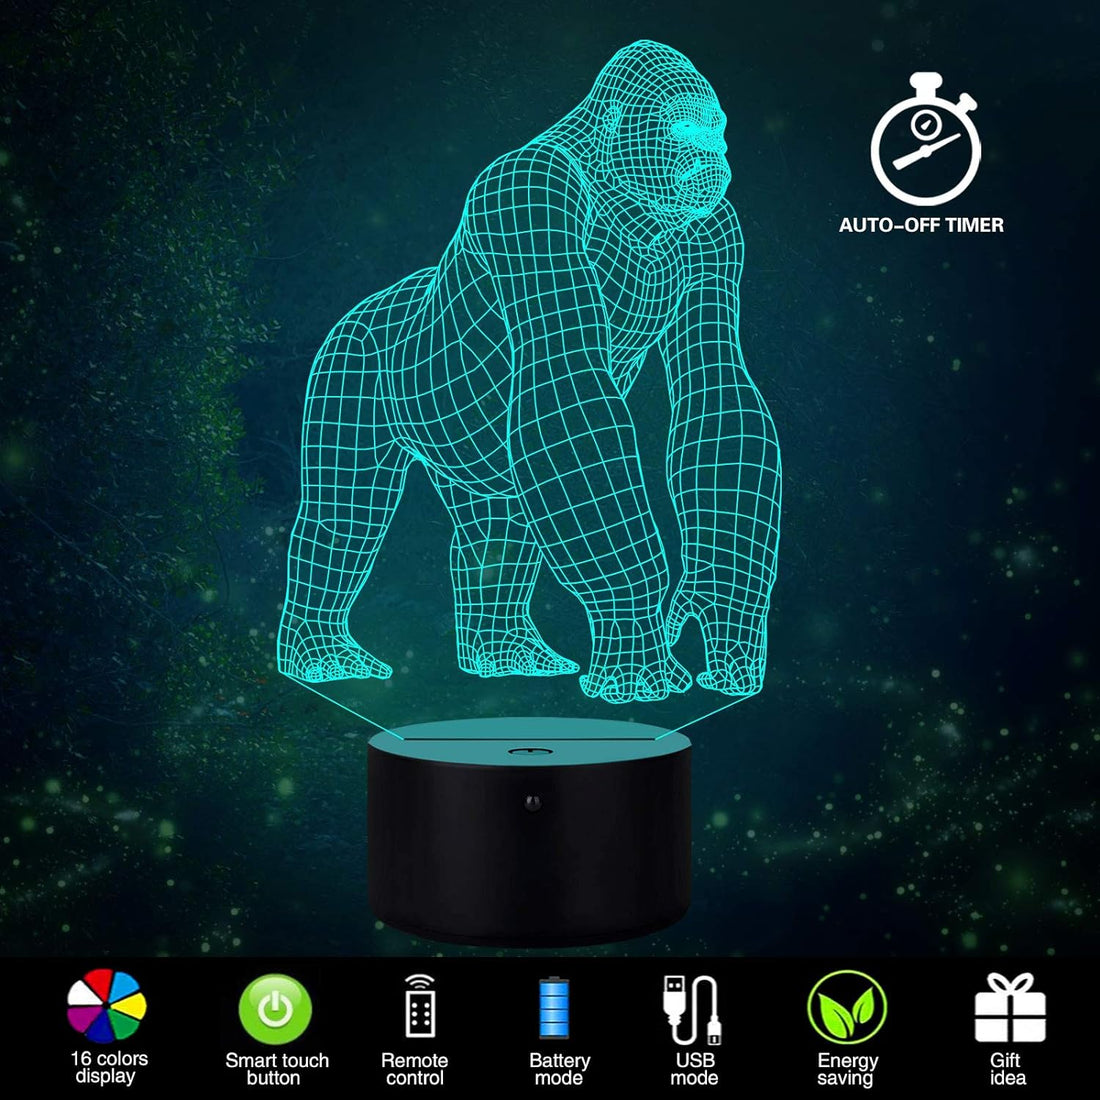 3D Gorilla Lamp Mood Lamp 16 Color Nursery Night Lights Illusion Acrylic LED Table Bedside Lamp, Children Bedroom Desk Decor, Birthday Christmas Gift Cute Toy for Kids Adult